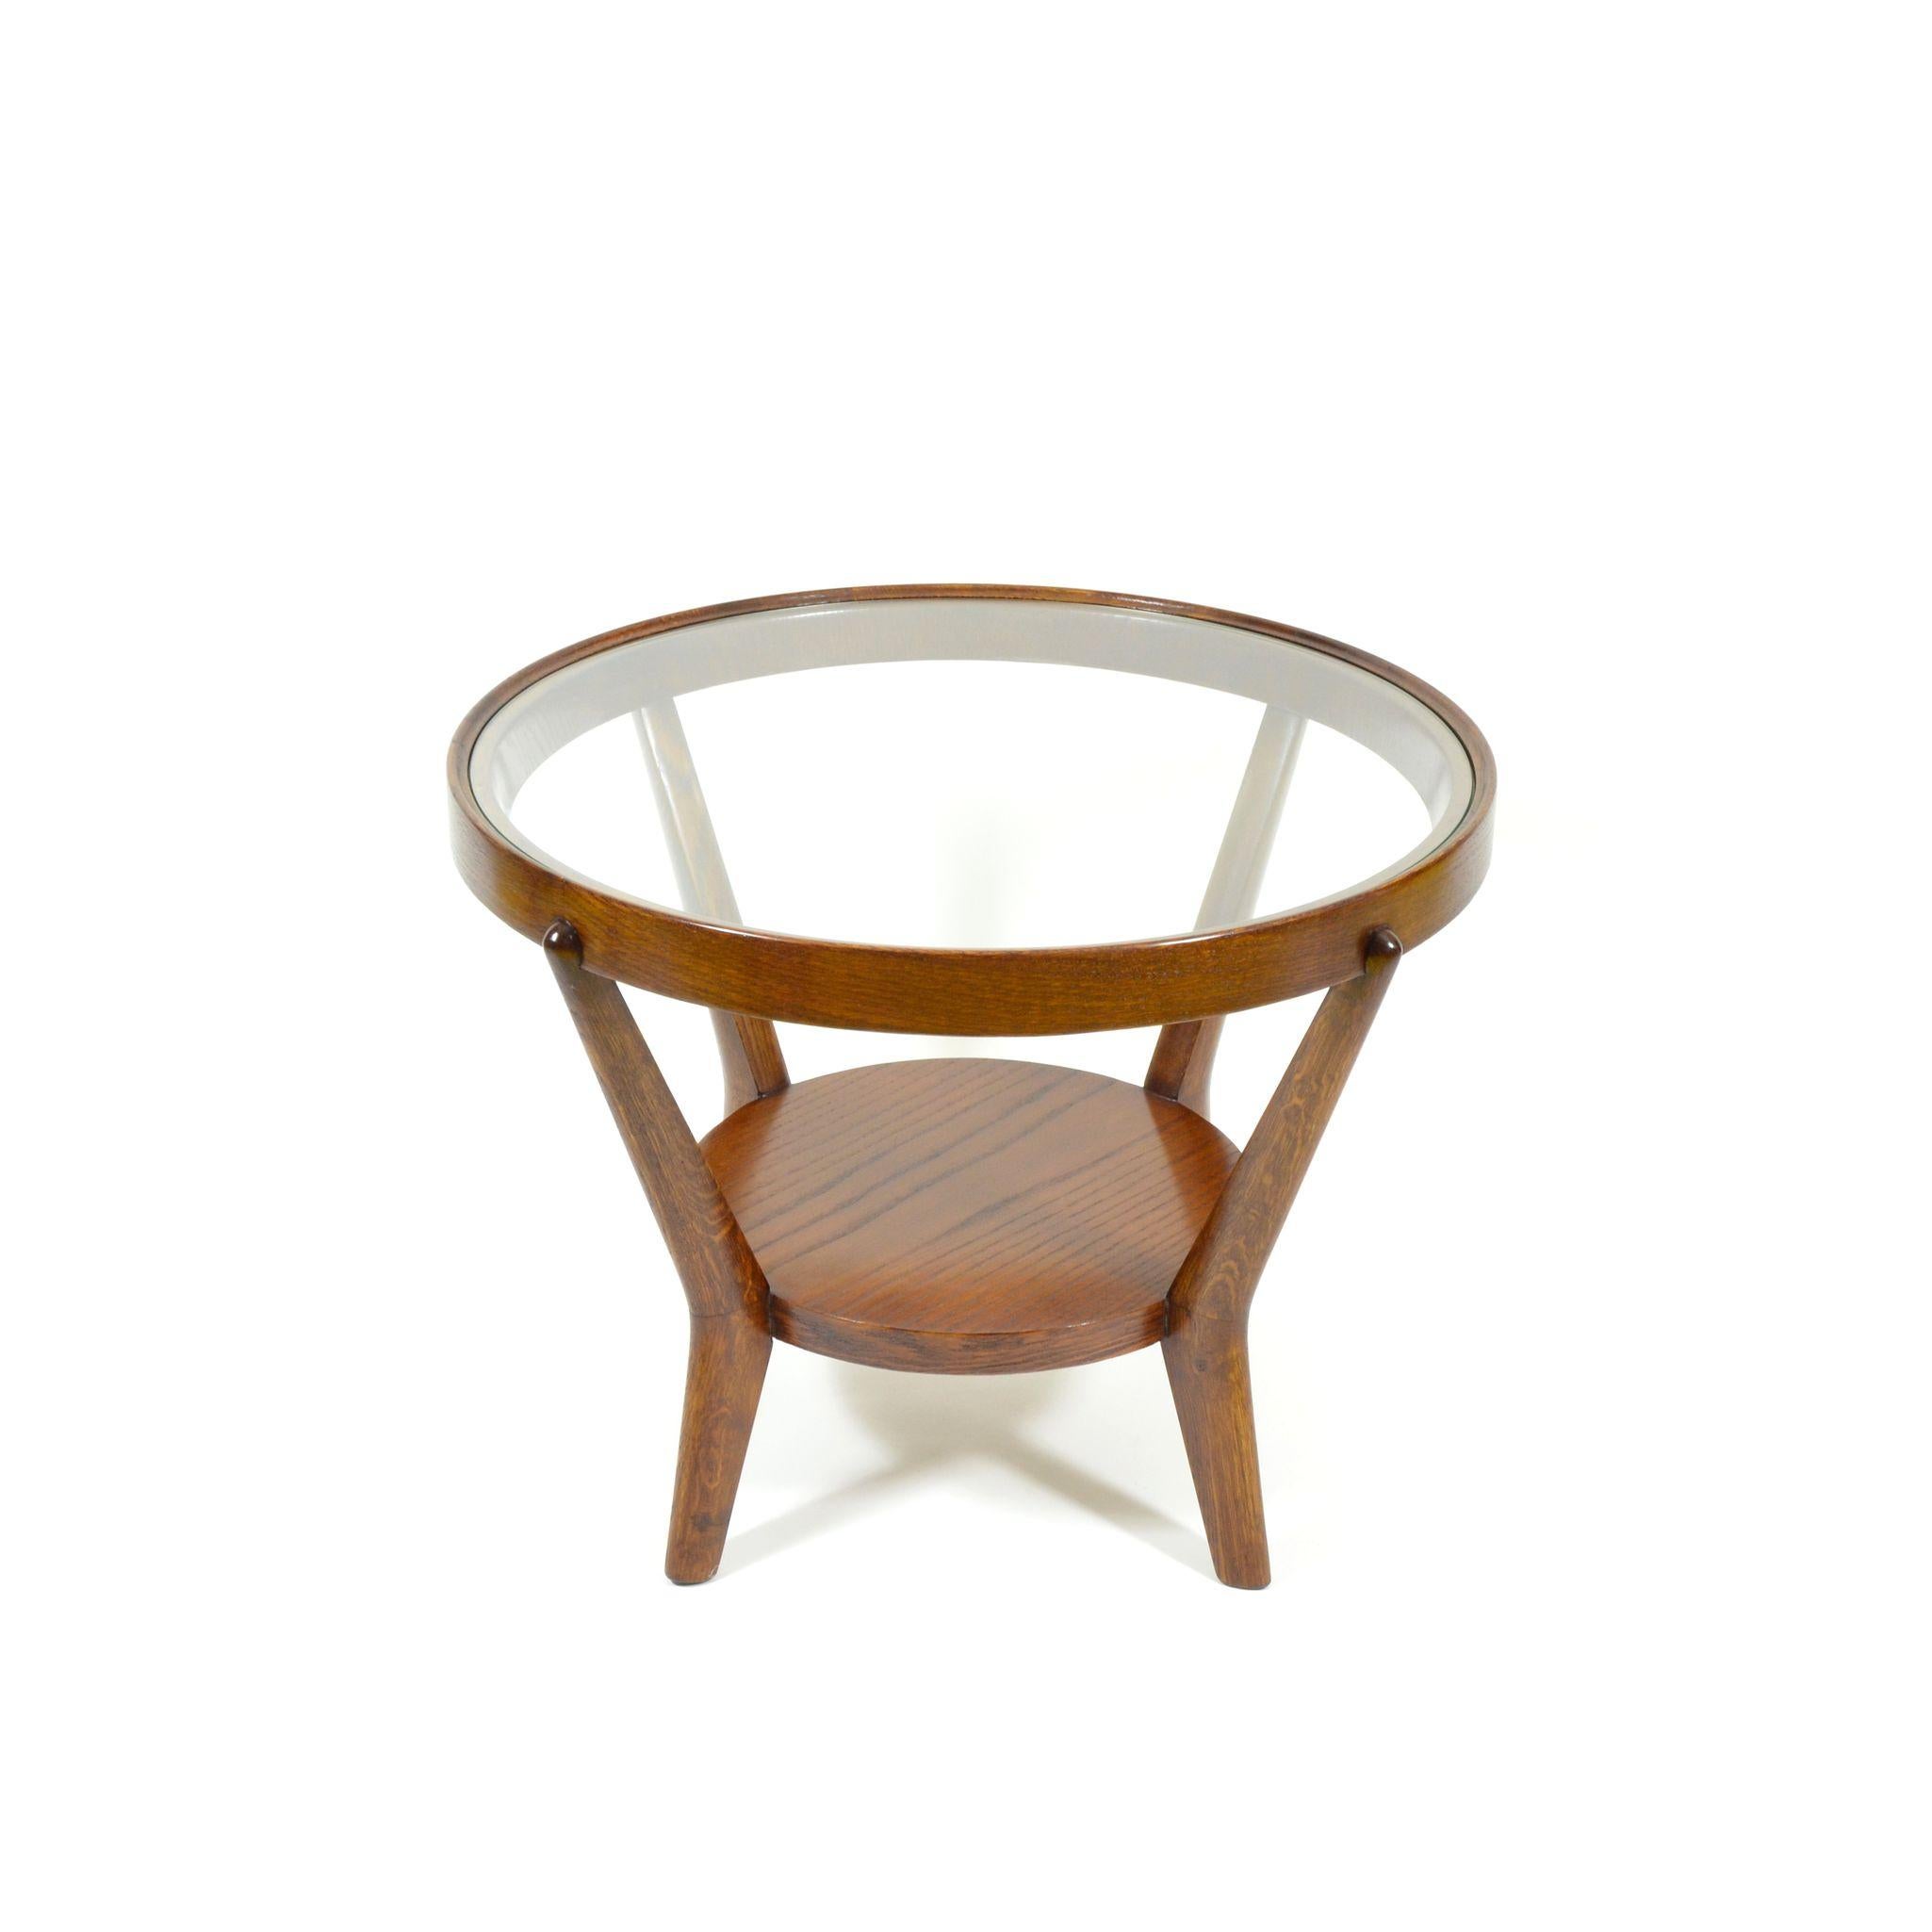 Round coffee table in functionalist style, designed in 1944 by K. Koželka and A. Kropácek for Ceské Umelecké Dílny. Varnished veneer, round glass table top inserted into a wooden frame. This table comes from a seating group that won a silver medal